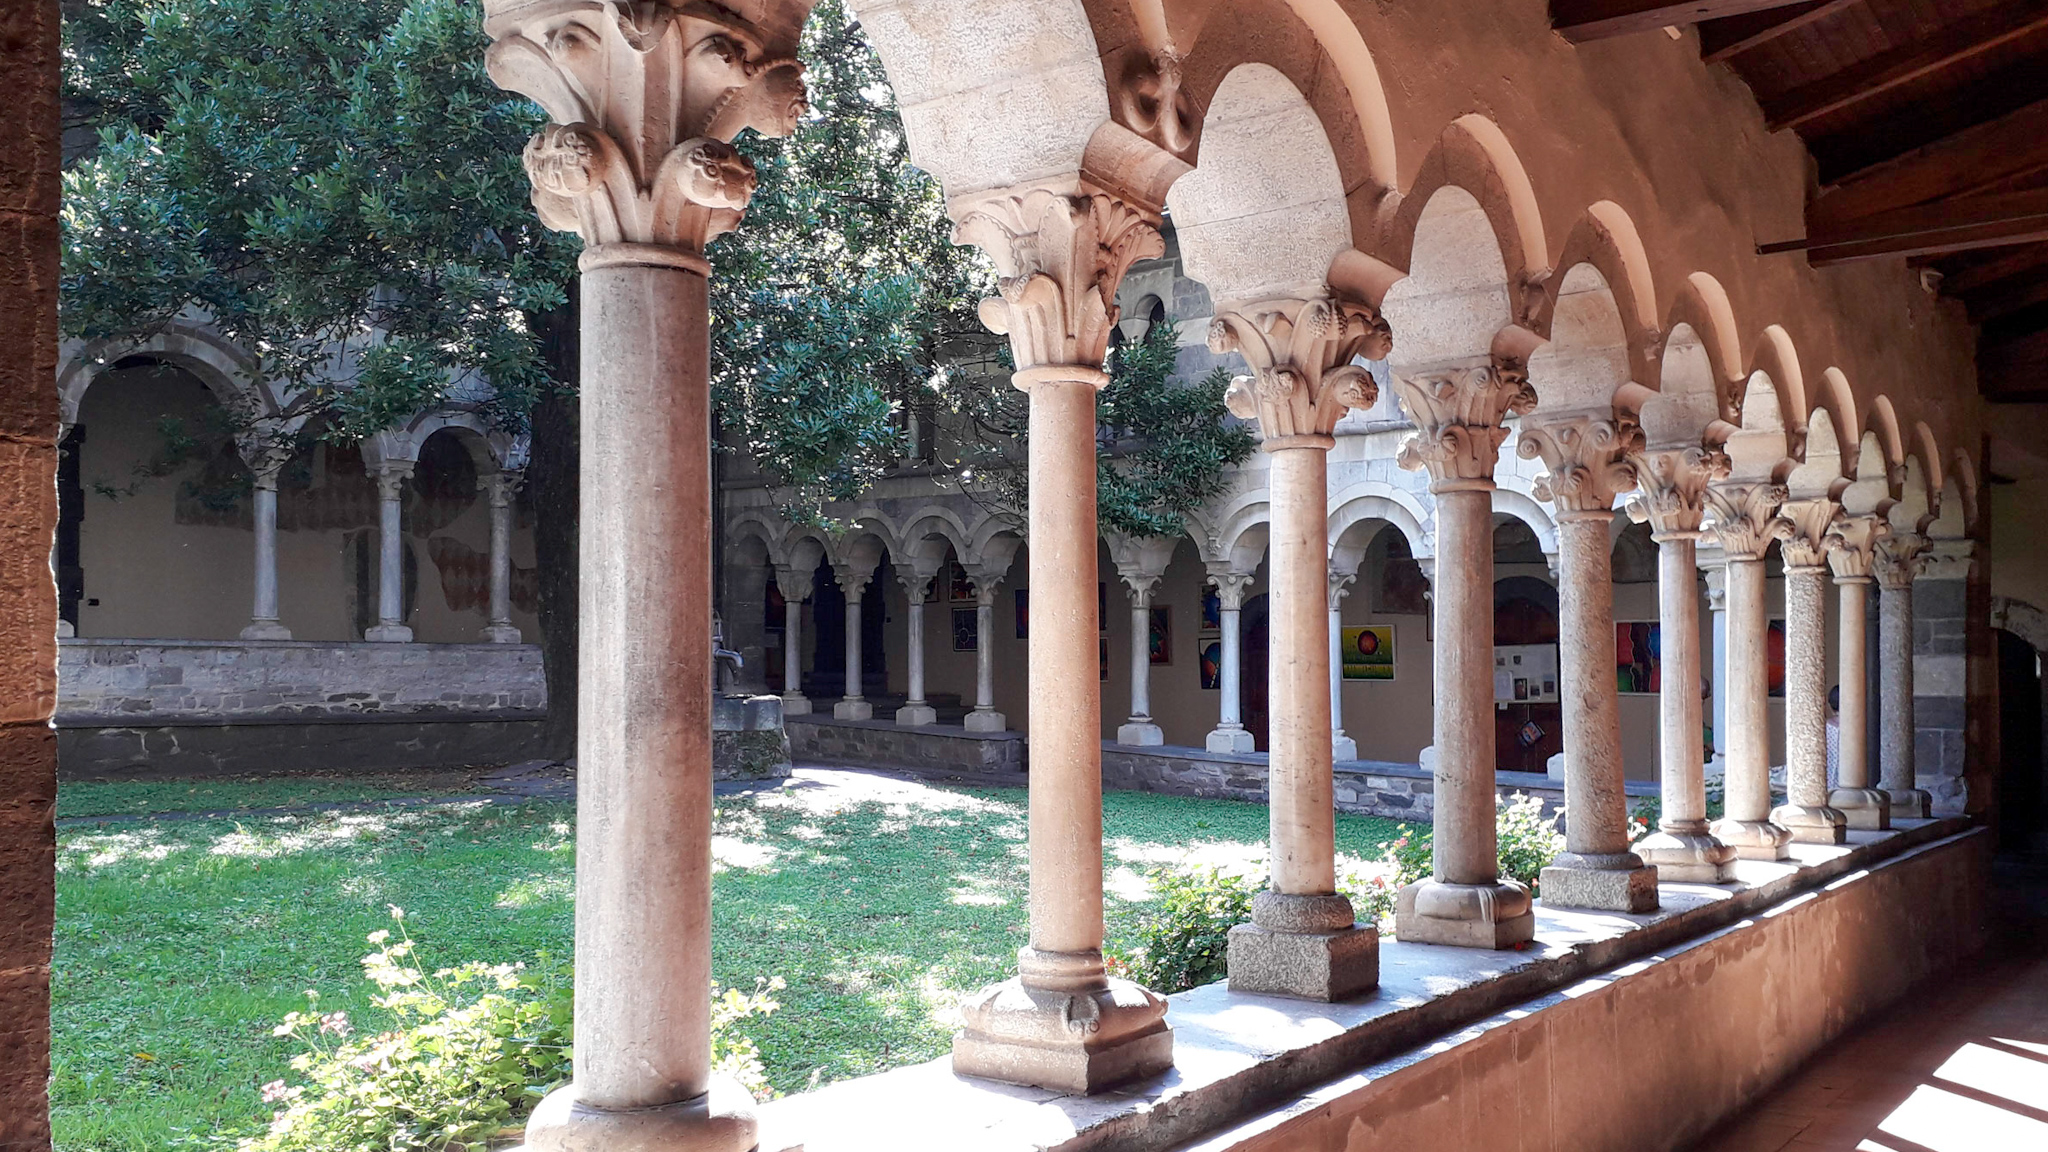 Nature and spirit: the Abbey of Piona (3 or 7 hours)